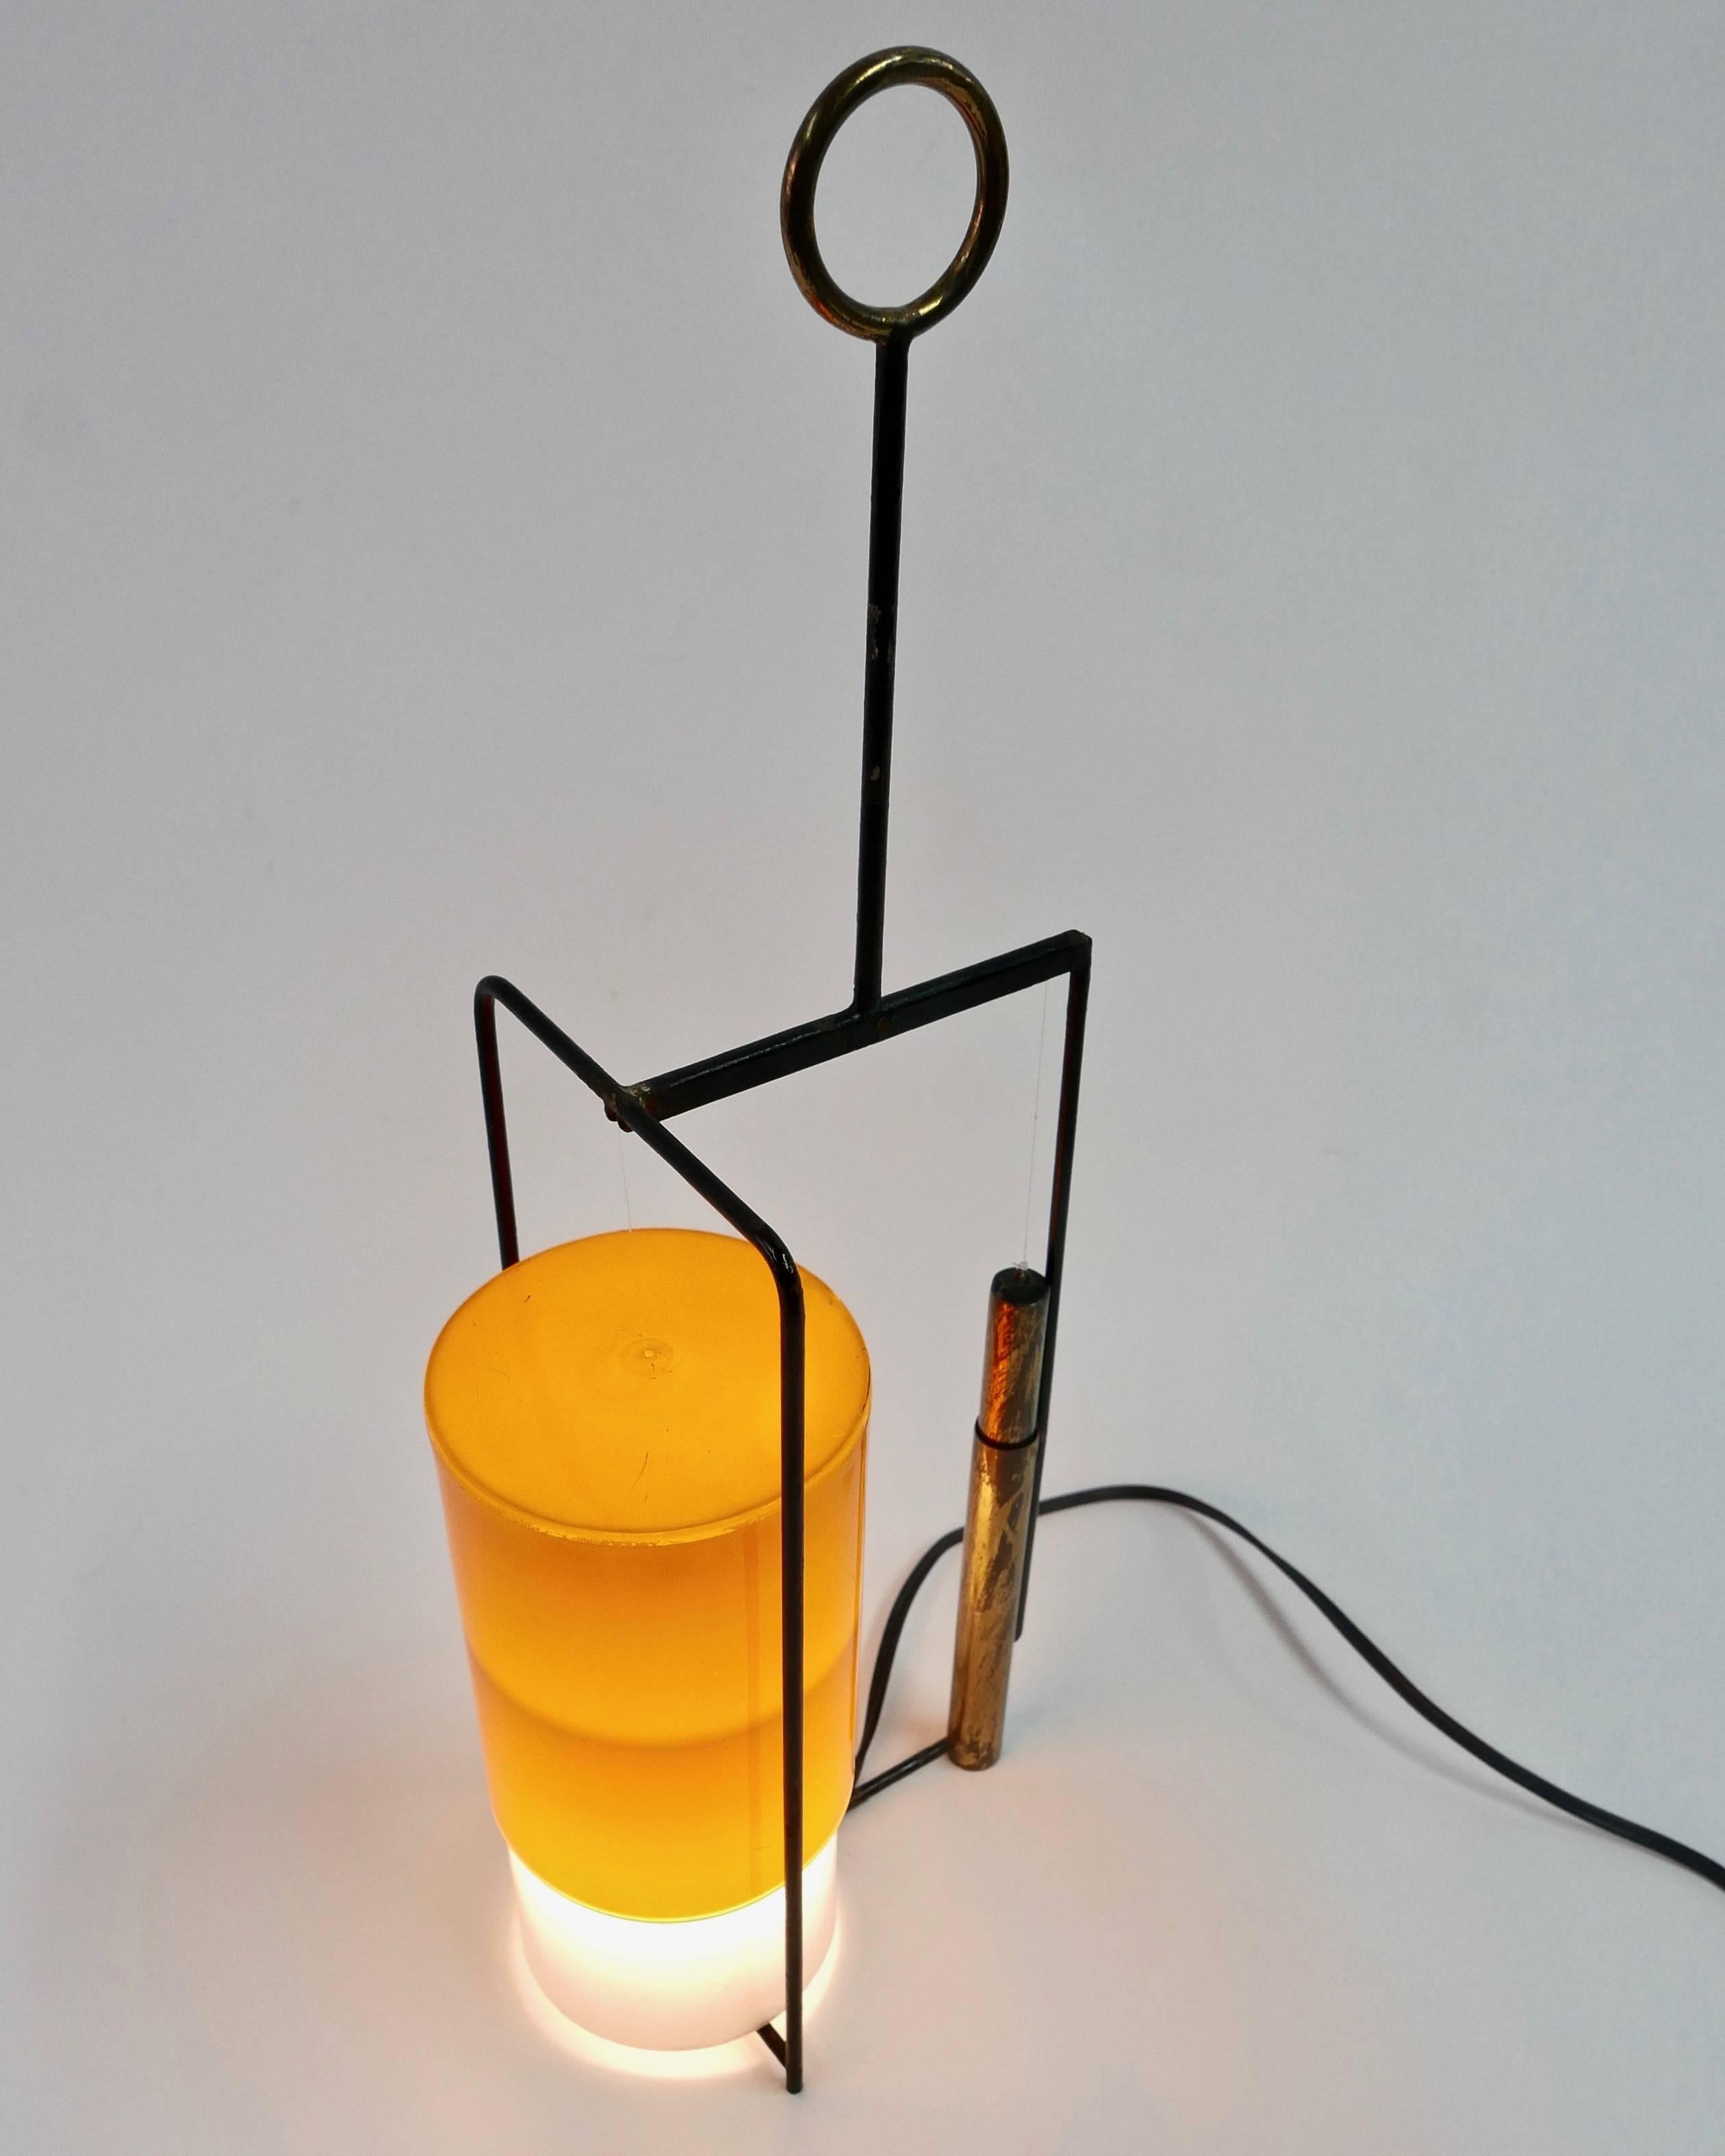 A small-scale table lamp with acrylic shade that adjusts up down with the aid of a brass counter weight.